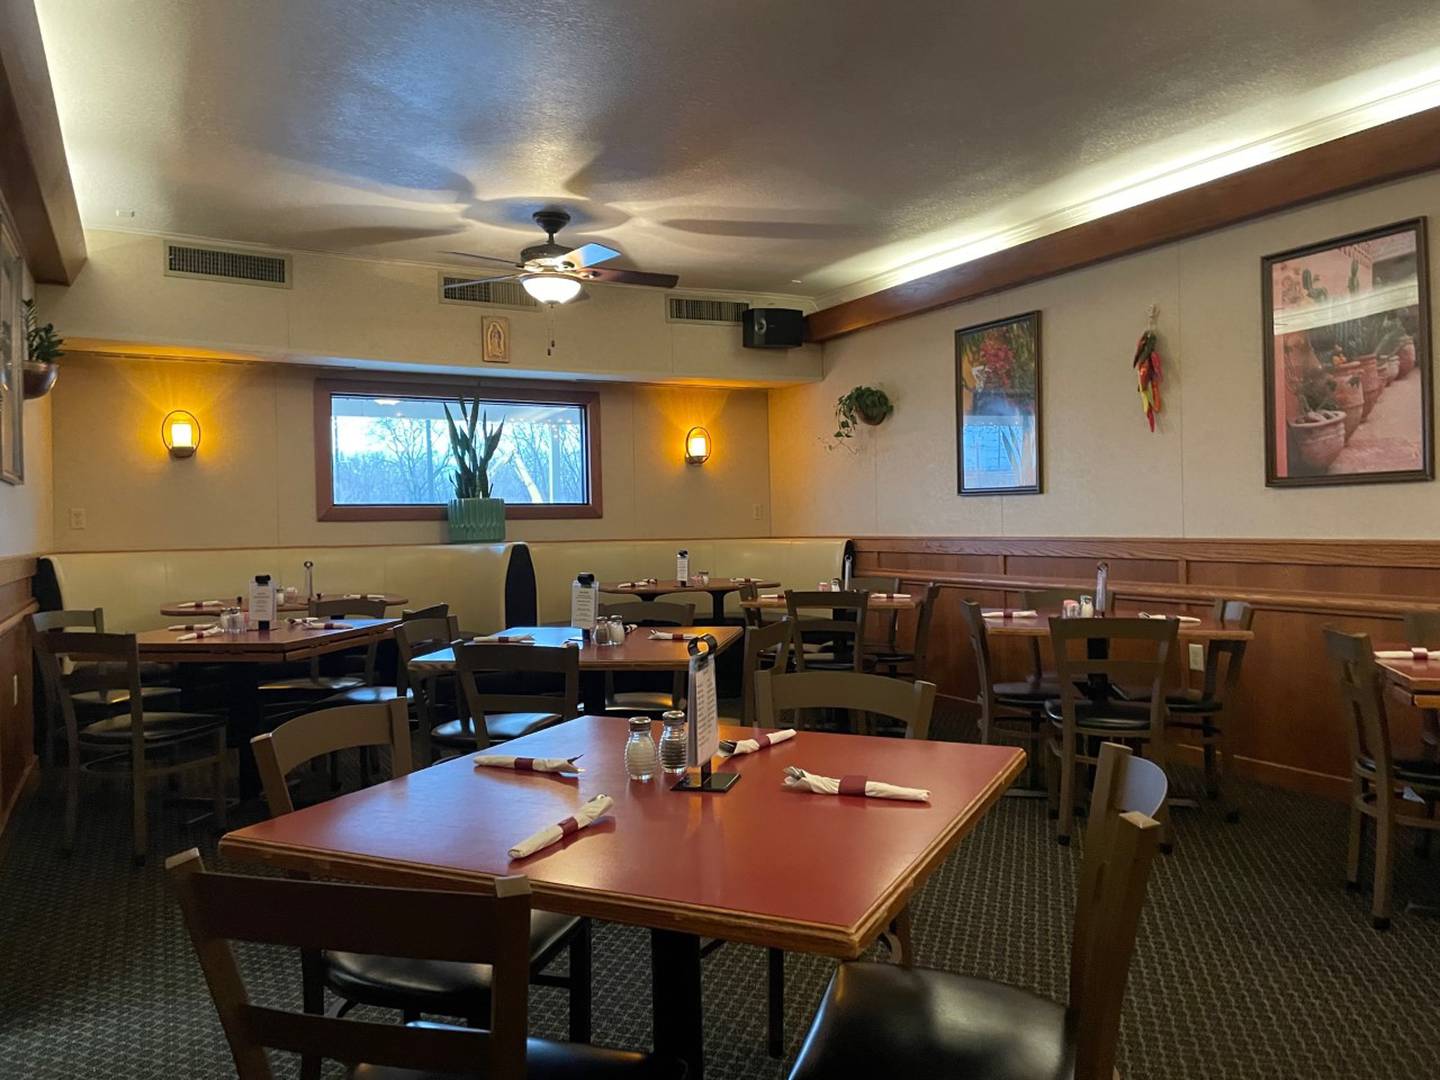 Jorge's Margaritas & Grill, located at 101 First St. in La Salle, took an Illinois Valley institution and added some Southwestern touches while sacrificing none of the coziness for which is was known.